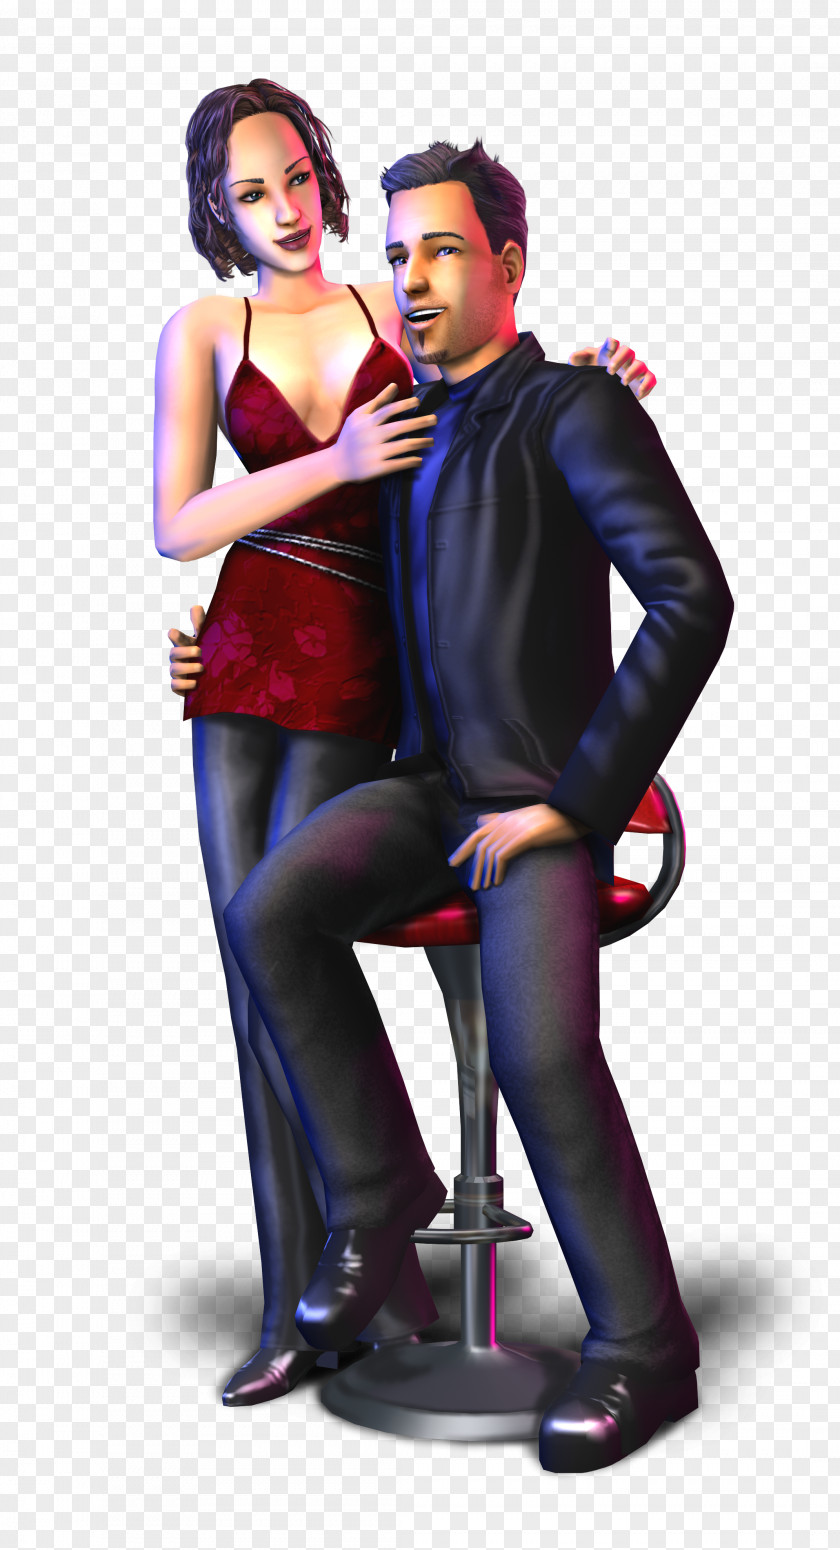 Sims 4 Download The 2: Nightlife Sims: Hot Date 3 Pets PNG